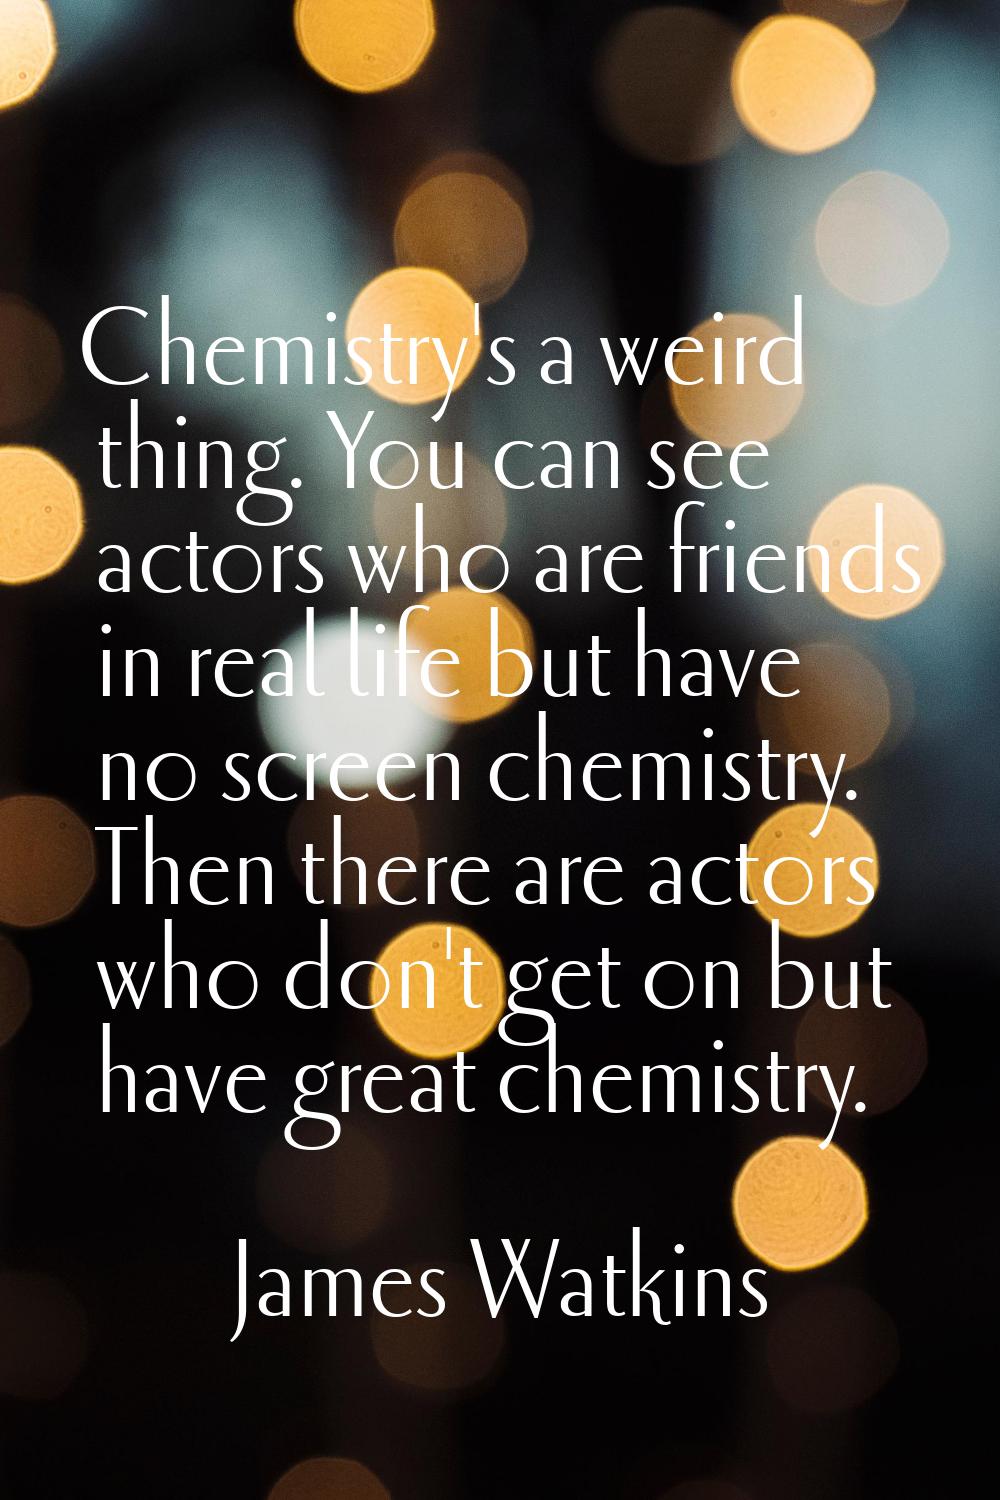 Chemistry's a weird thing. You can see actors who are friends in real life but have no screen chemi